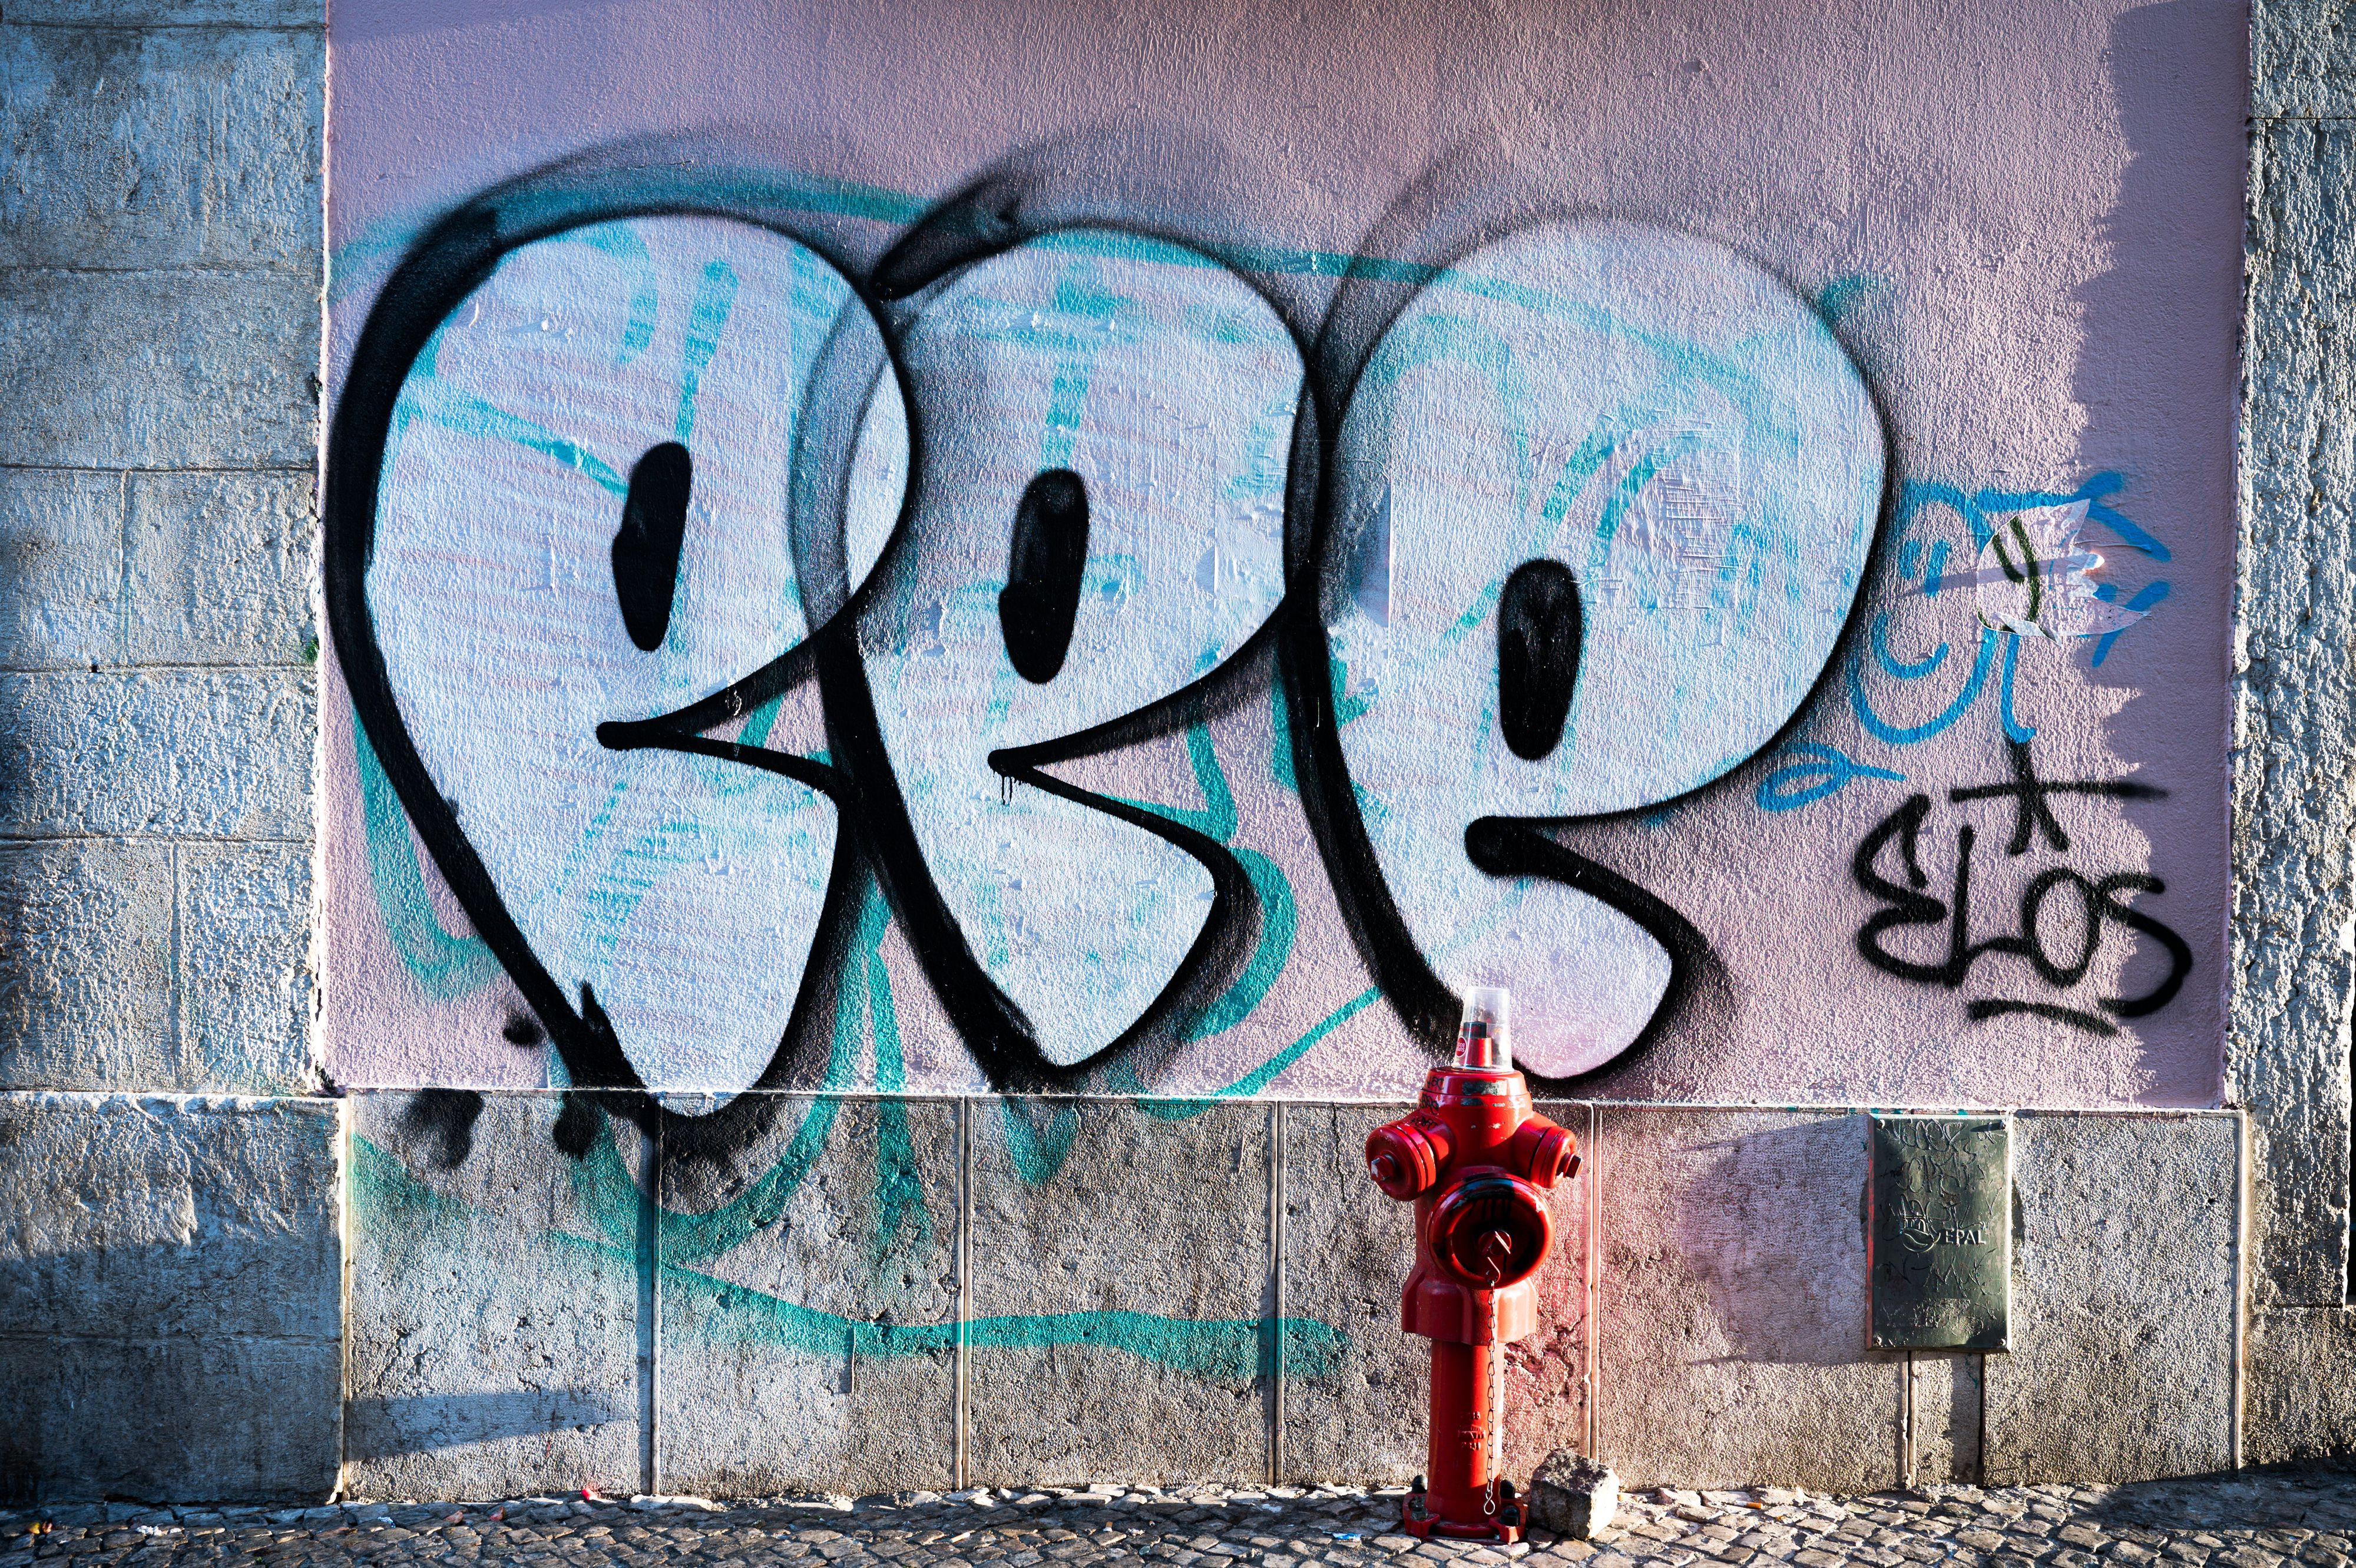 Wall in Lisbon Portugal with colorful graffiti and fire hydrant